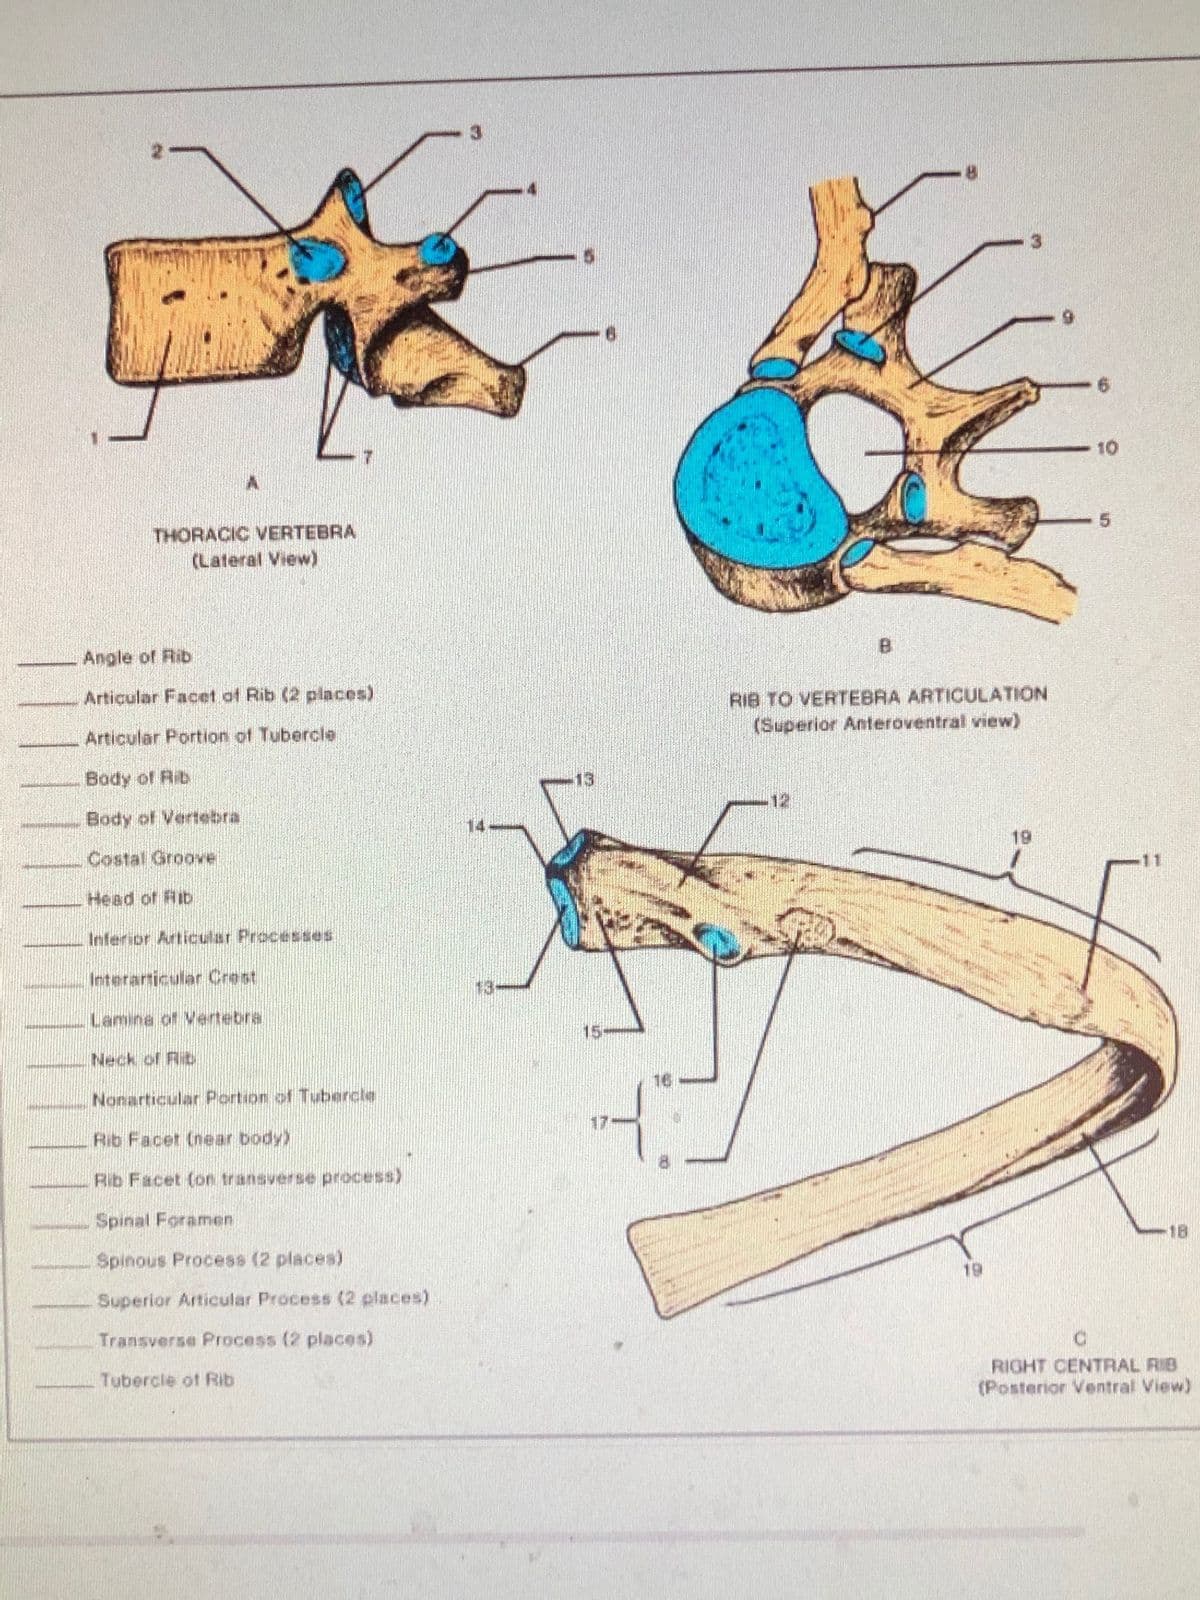 THORACIC VERTEBRA
(Lateral View)
Angle of Rib
Articular Facet of Rib (2 places)
Articular Portion of Tubercle
Body of Rib
Body of Vertebra
Costal Groove
Head of lib
Inferior Articular Processes
Interarticular Crest
Lamina of Vertebra
Neck of Ri
Nonarticular Portion of Tubercle
Rib Facet (near body)
Rib Facet (on transverse process)
Spinal Foramen
Spinous Process (2 places)
Superior Articular Process (2 places)
Transverse Process (2 places)
Tubercle of Rib
14
13-
13
15:
17
16
B
RIB TO VERTEBRA ARTICULATION
(Superior Anteroventral view)
12
19
10
18
C
RIGHT CENTRAL RIB
(Posterior Ventral View)